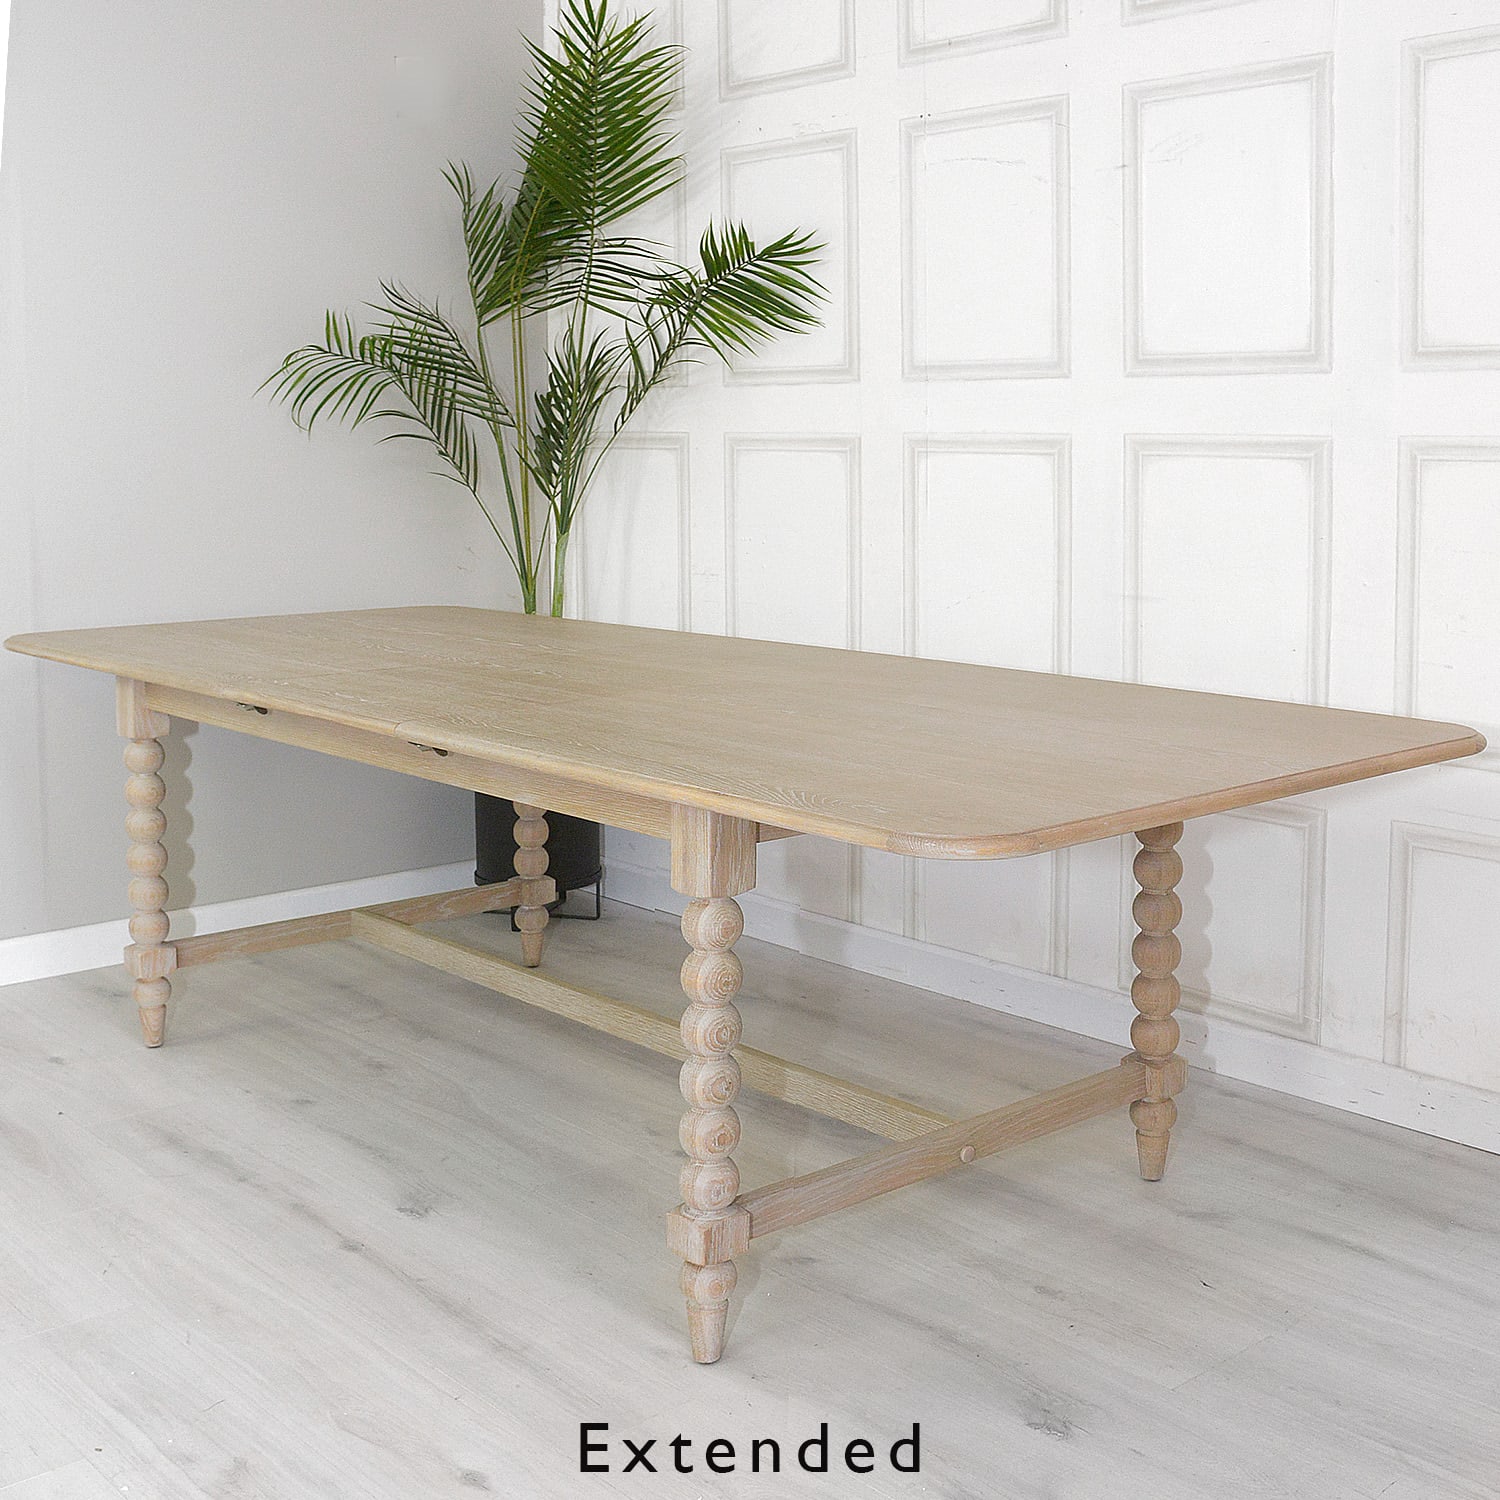 Arcade Fabel Wooden Extending Dining Table